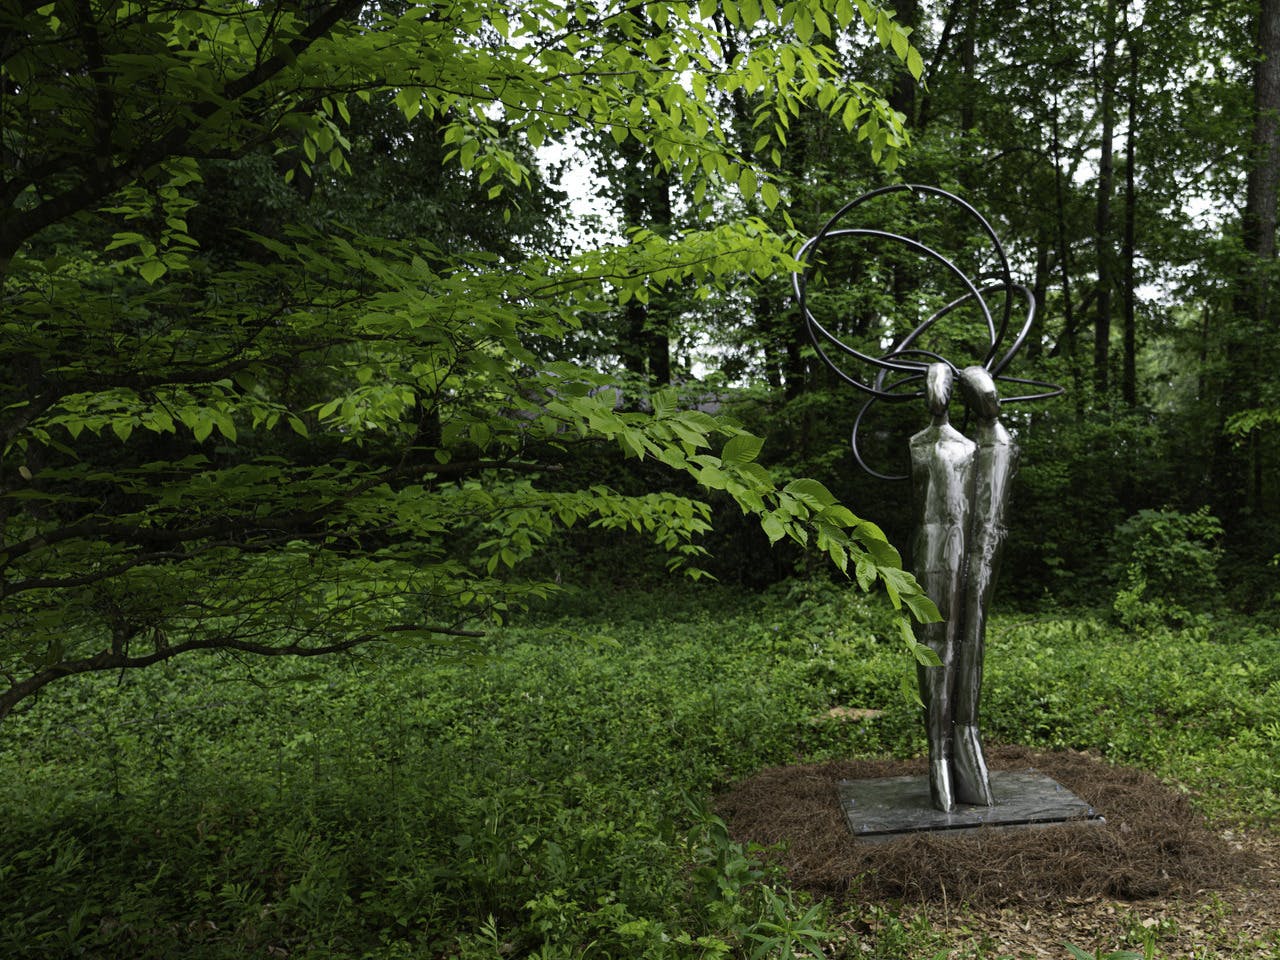 A silver statue of two twin women sits in a greenspace surrounded by trees.